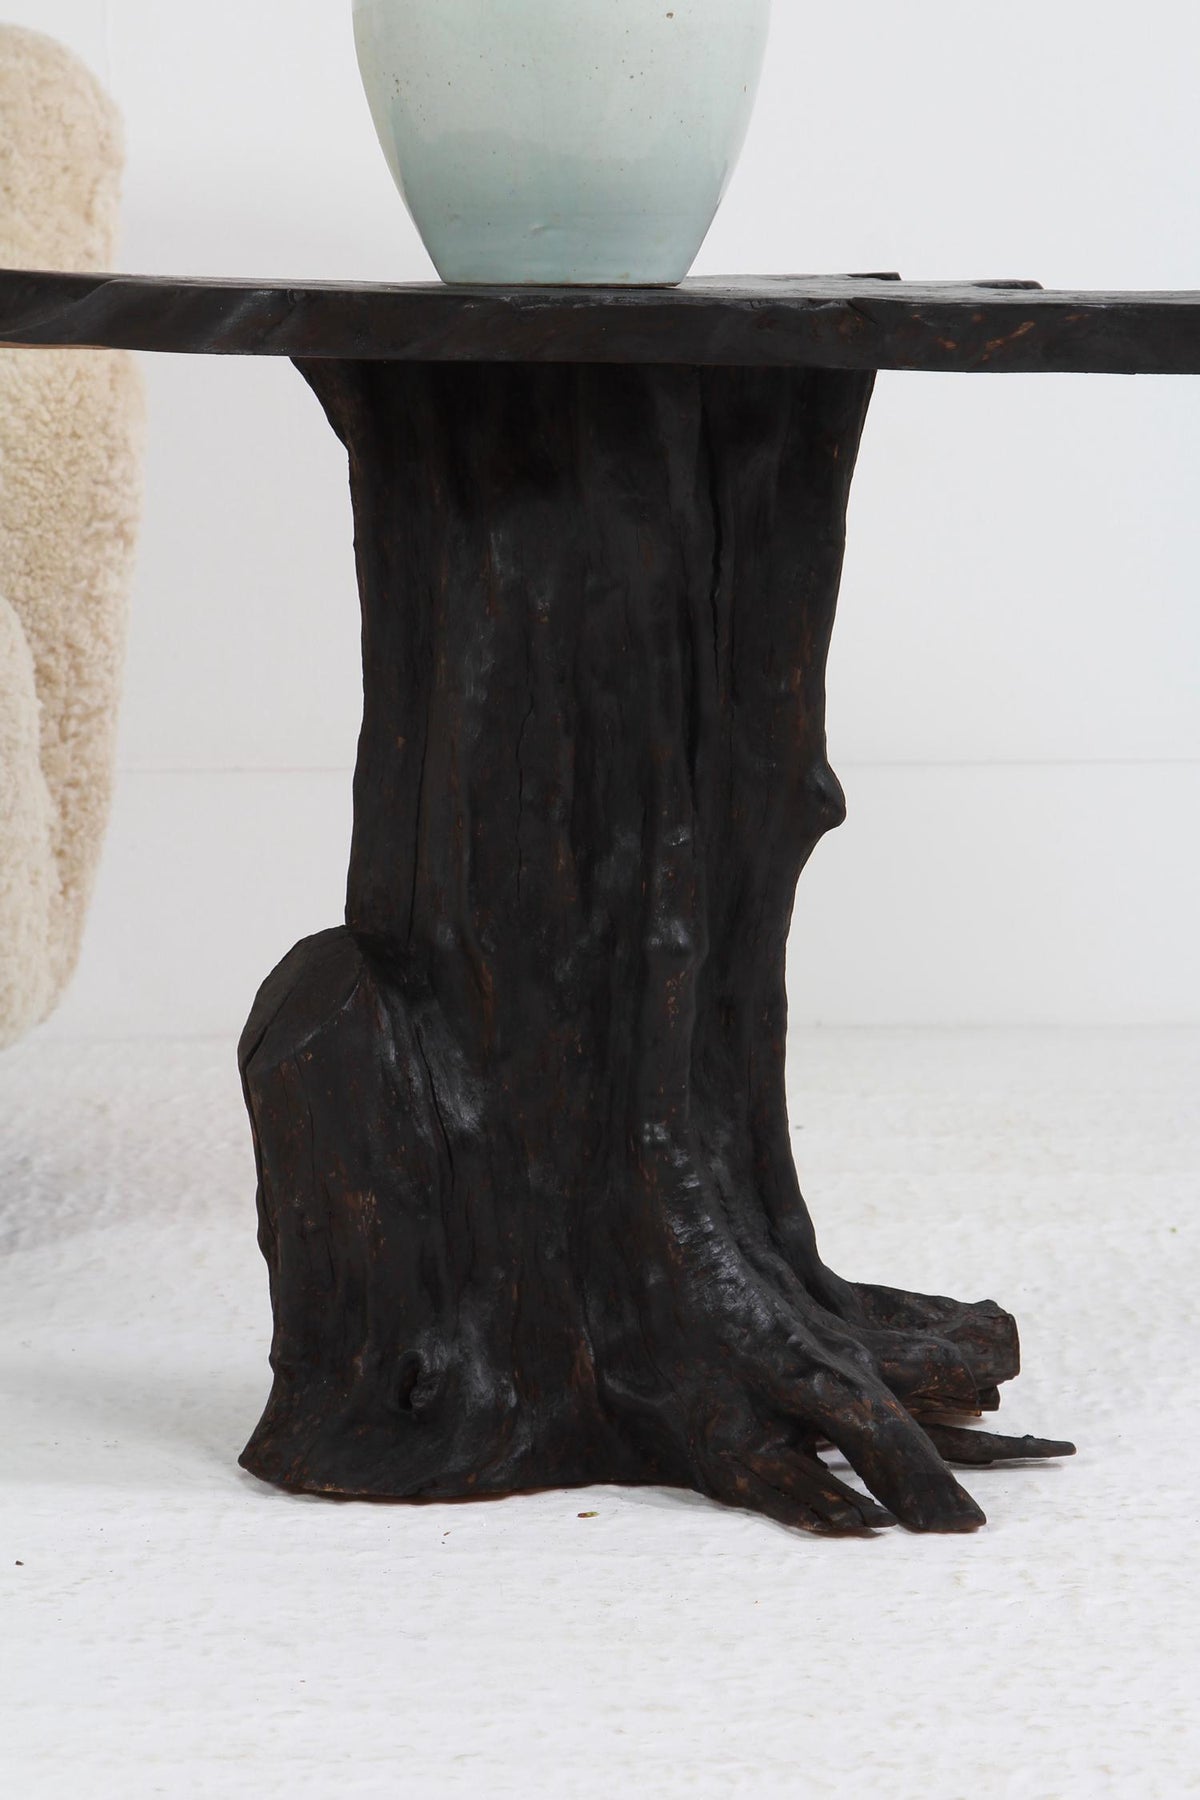 Natural Form Japanese Inspired Tree Root Table